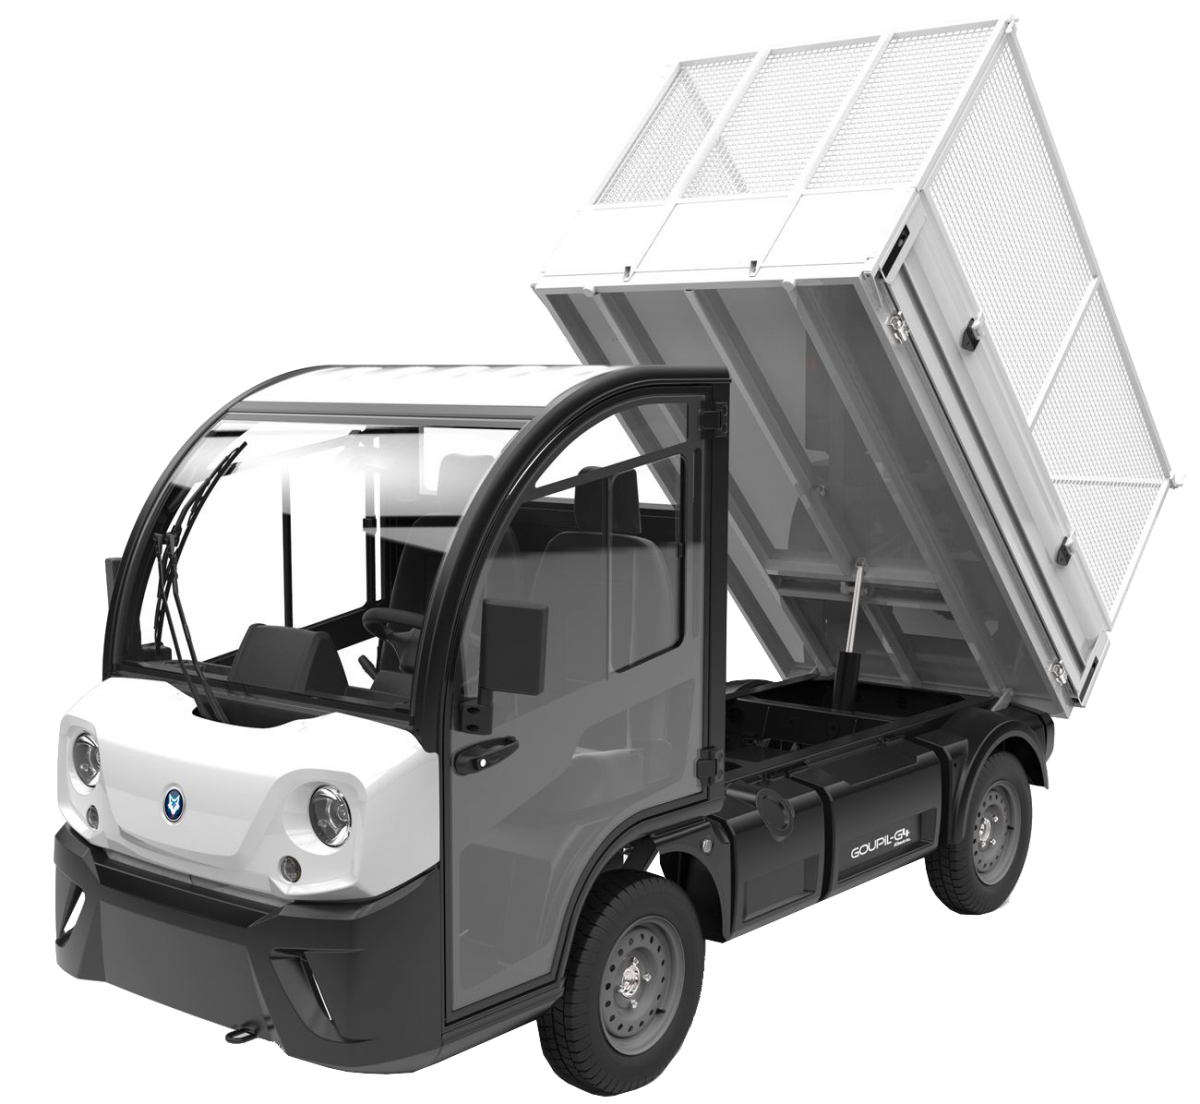 Goupil G4 Tipper Electric Utility Vehicle Goupil Electric Vehicles